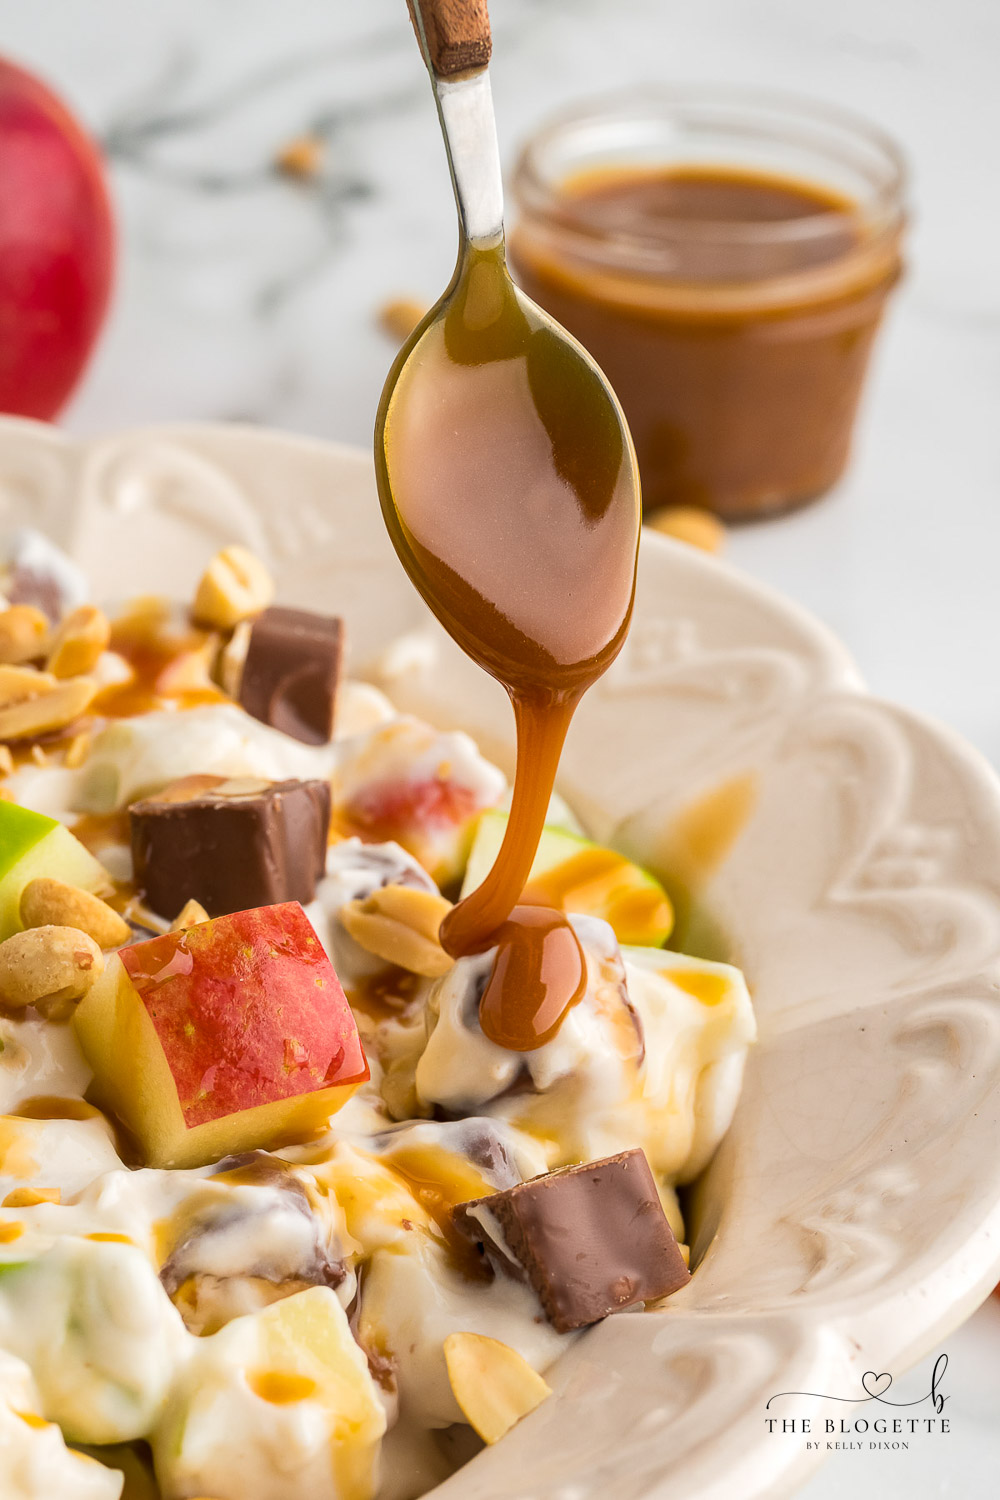 Caramel drizzled over apple salad